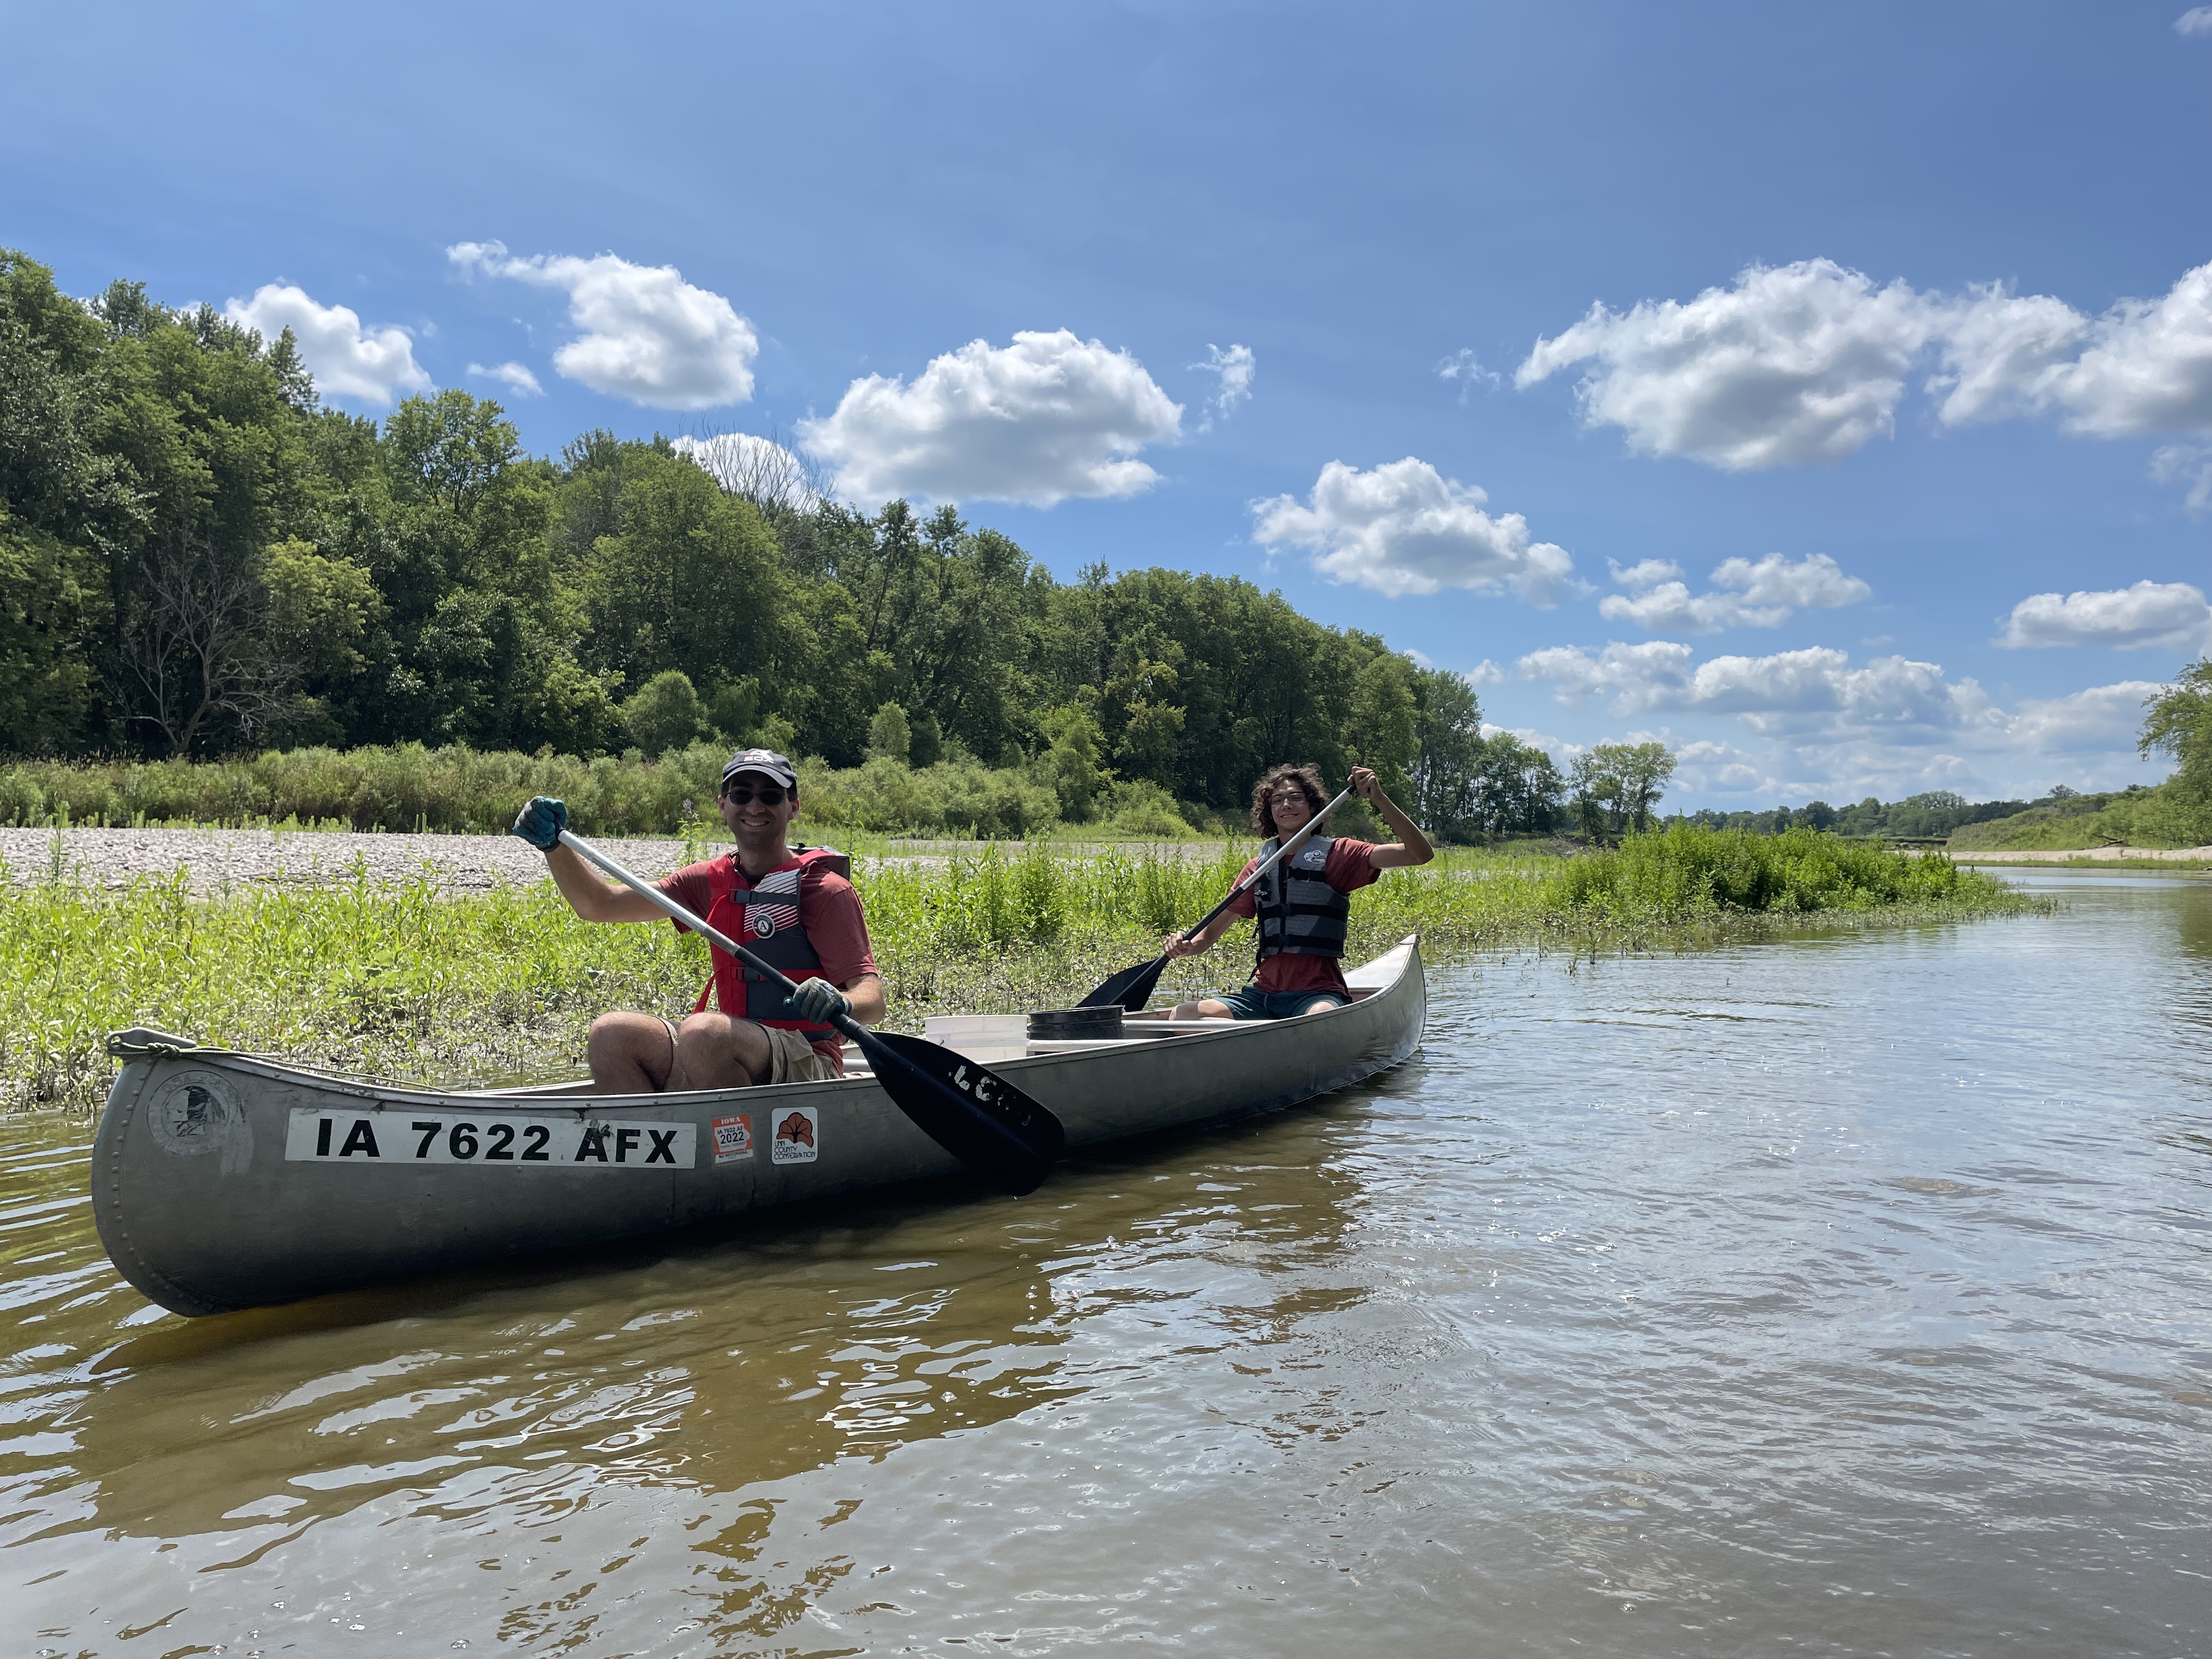 Two AmeriCorps members canoeing down a river